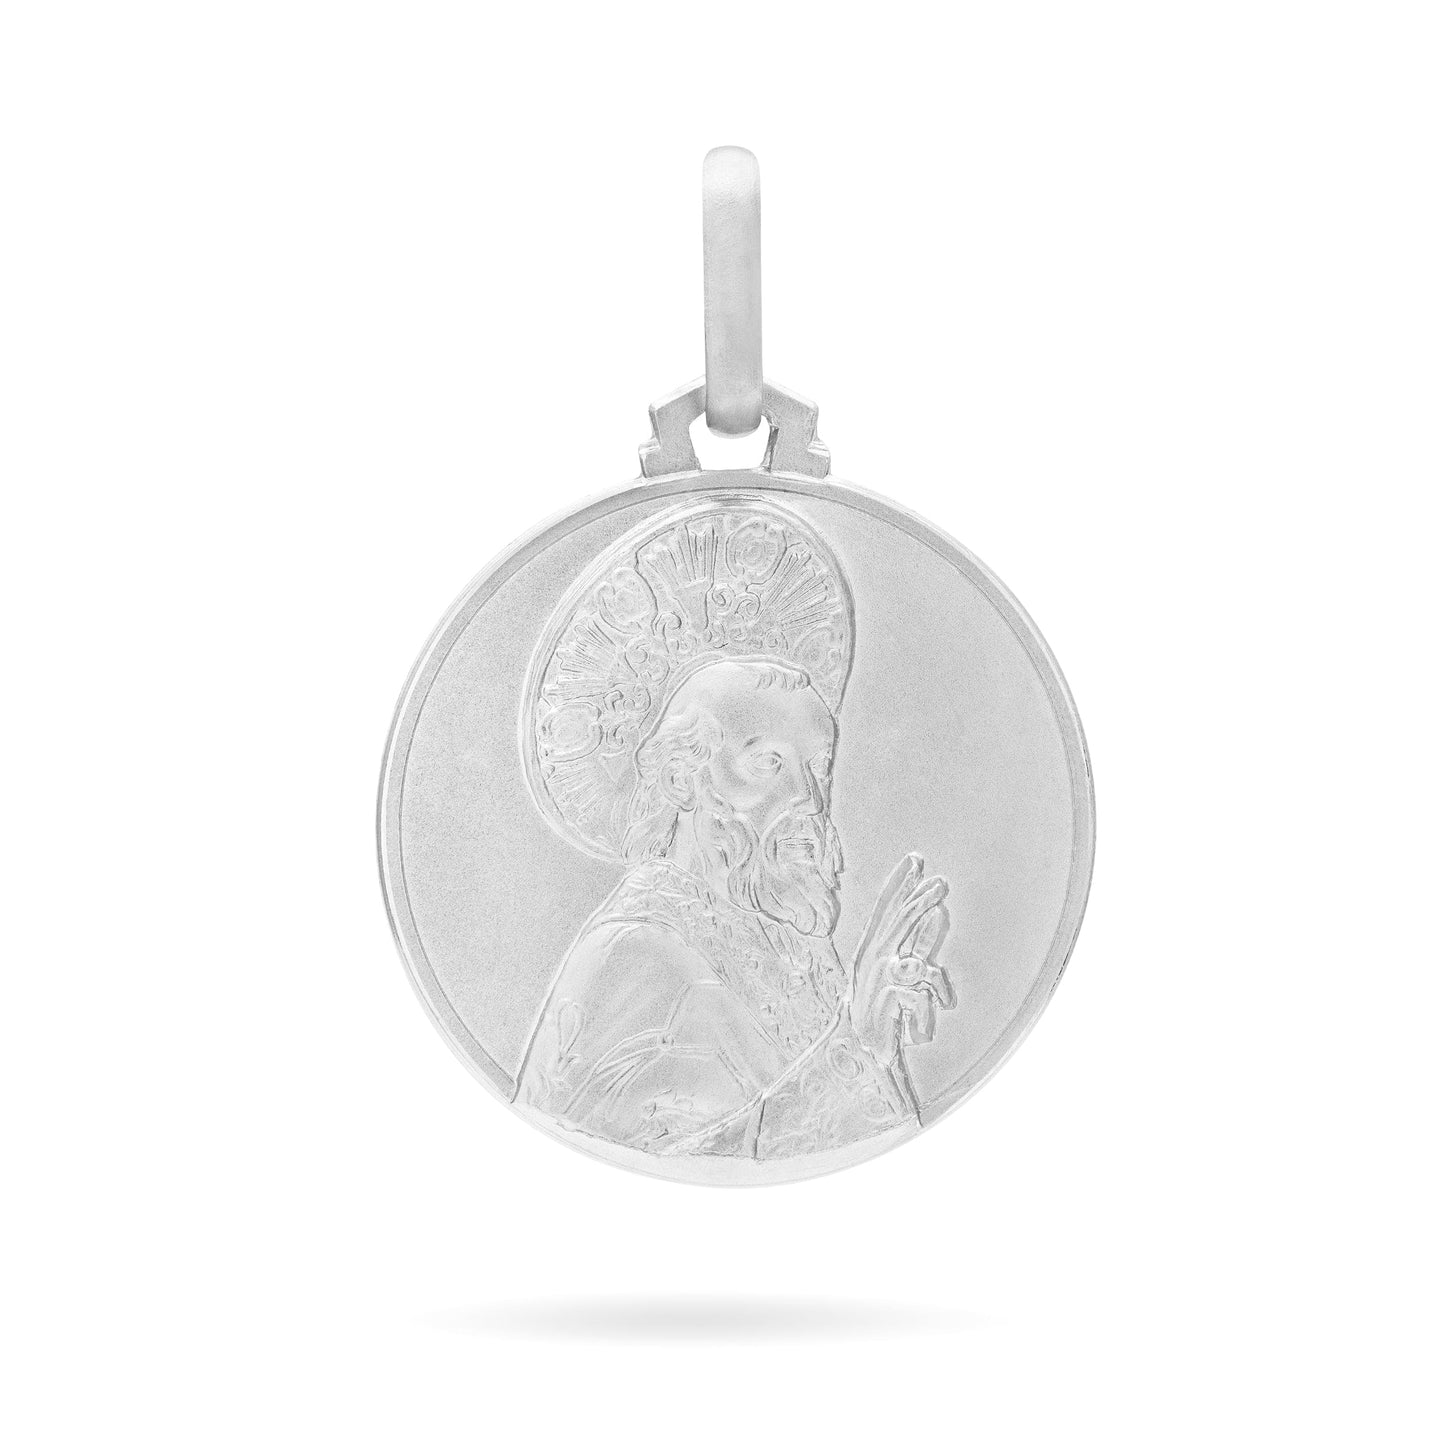 MONDO CATTOLICO Medal 18 mm (0.70 in) Silver medal of Saint Nicholas of Bari